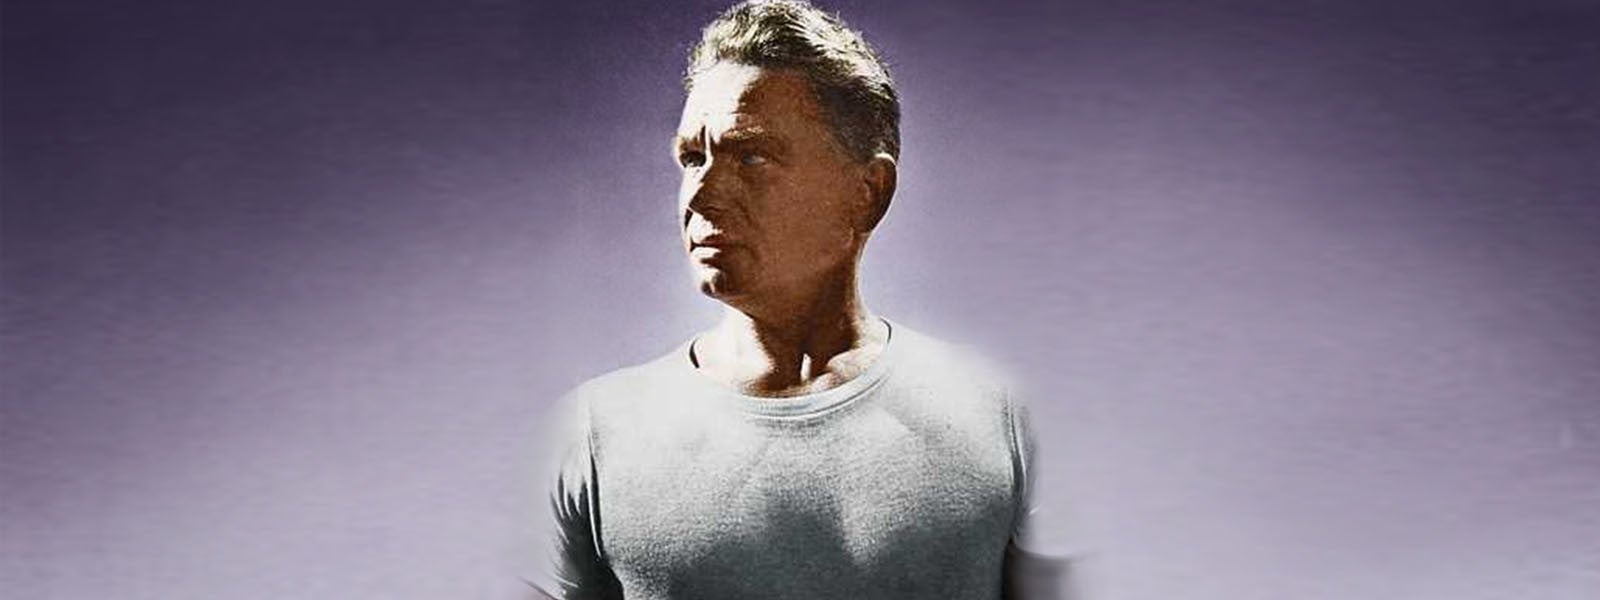 Joseph Pilates at 82 - His techniques have changed my body and mind. GOOD  STUFF 4 LIFE!!!